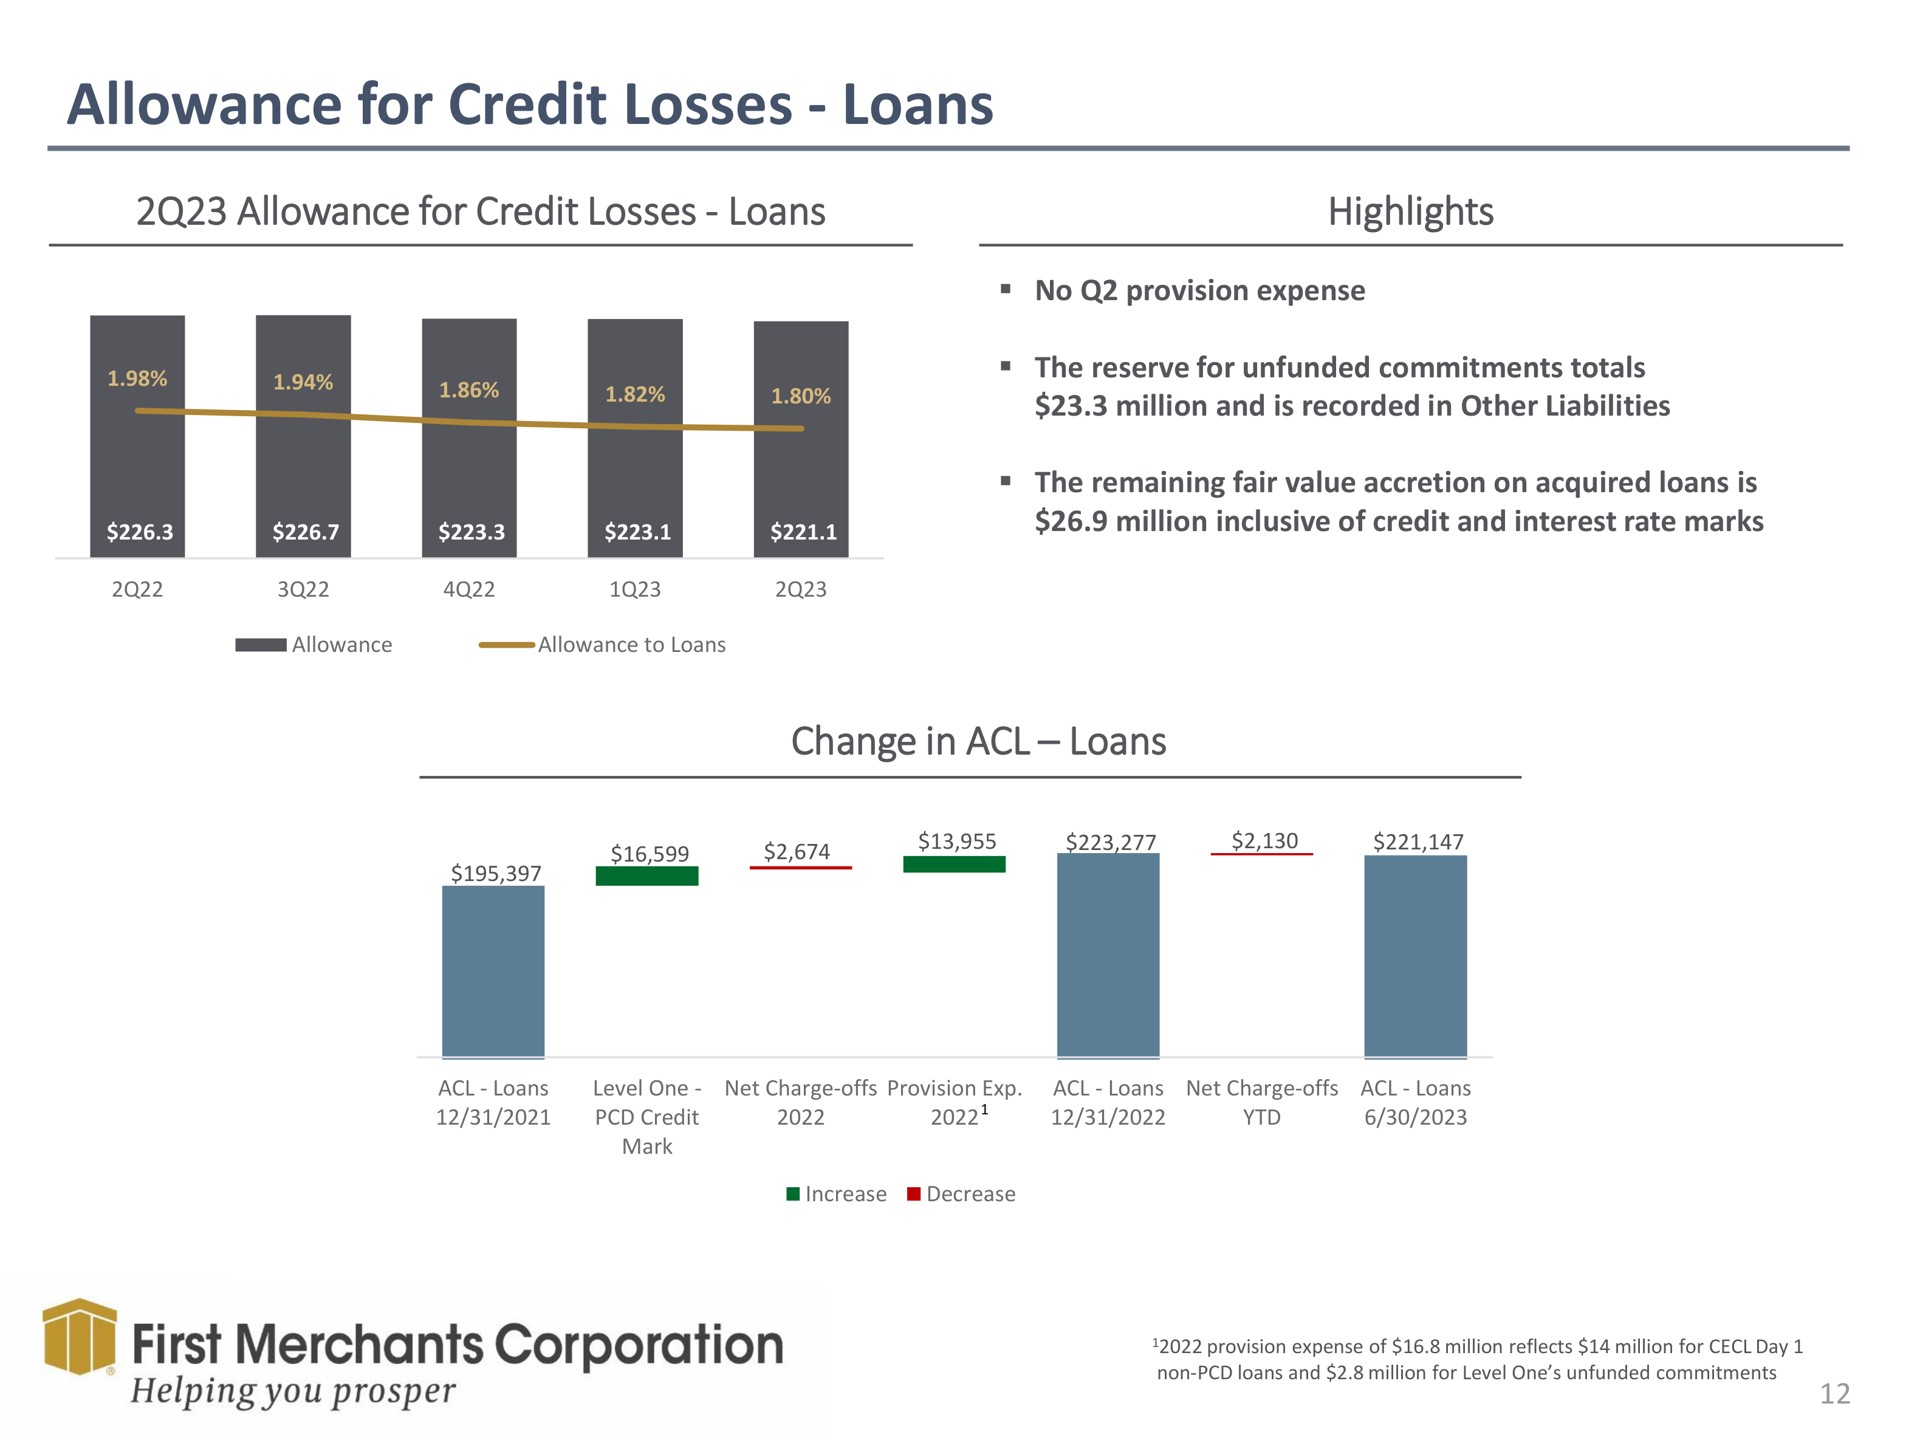 allowance for credit losses loans highlights change in helping you prosper | First Merchants